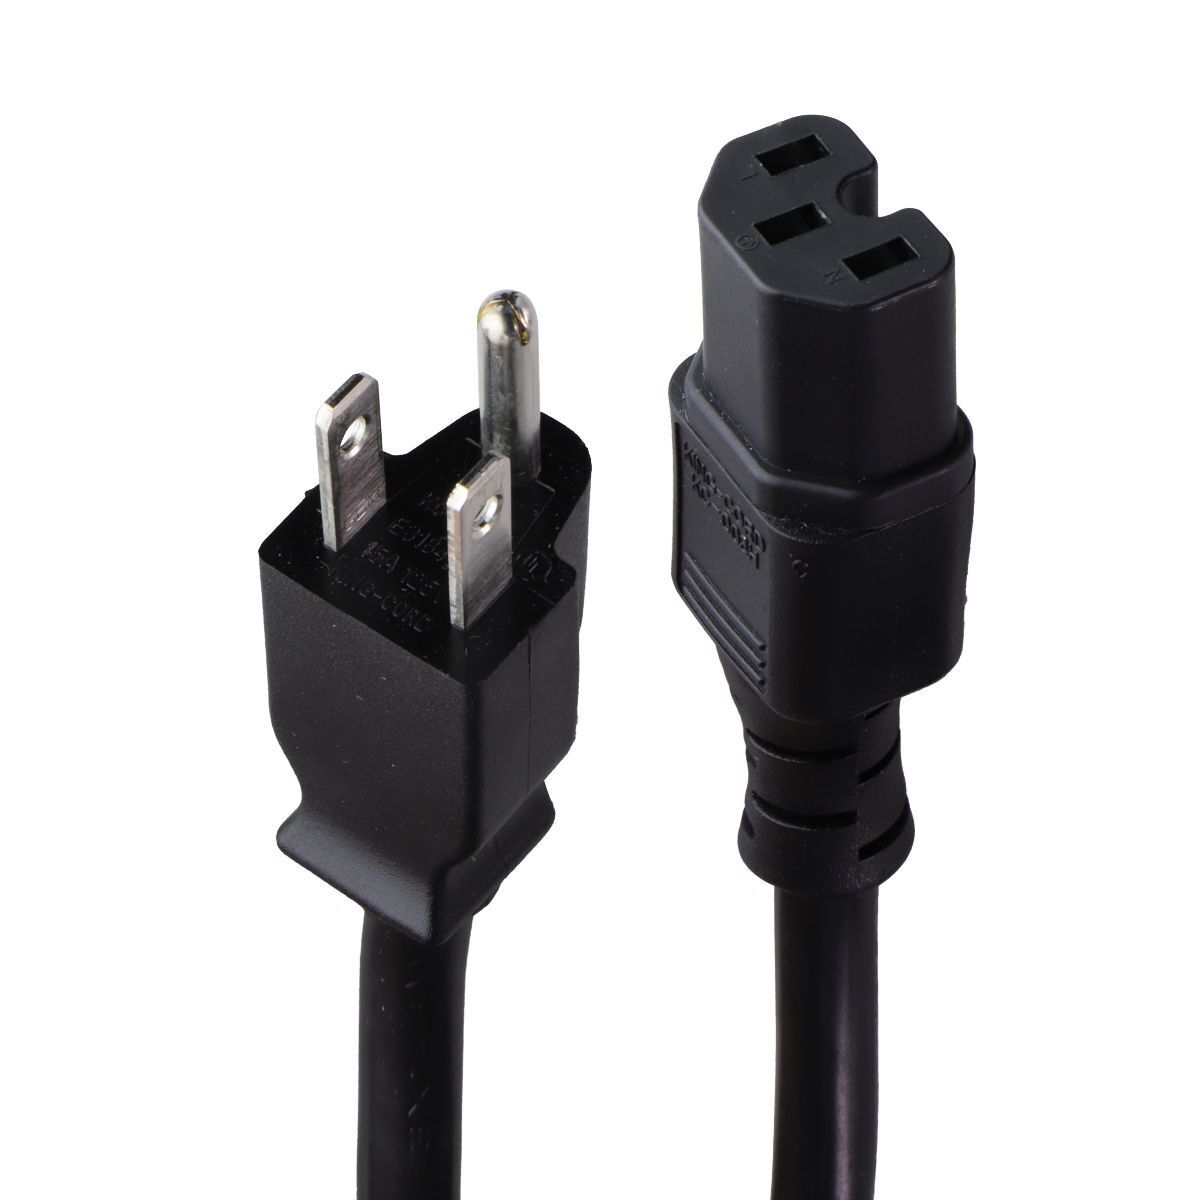 King-Cord (KC-003H / KC-001) 15A/125V Grounded Power Cable Cord - Black E318430